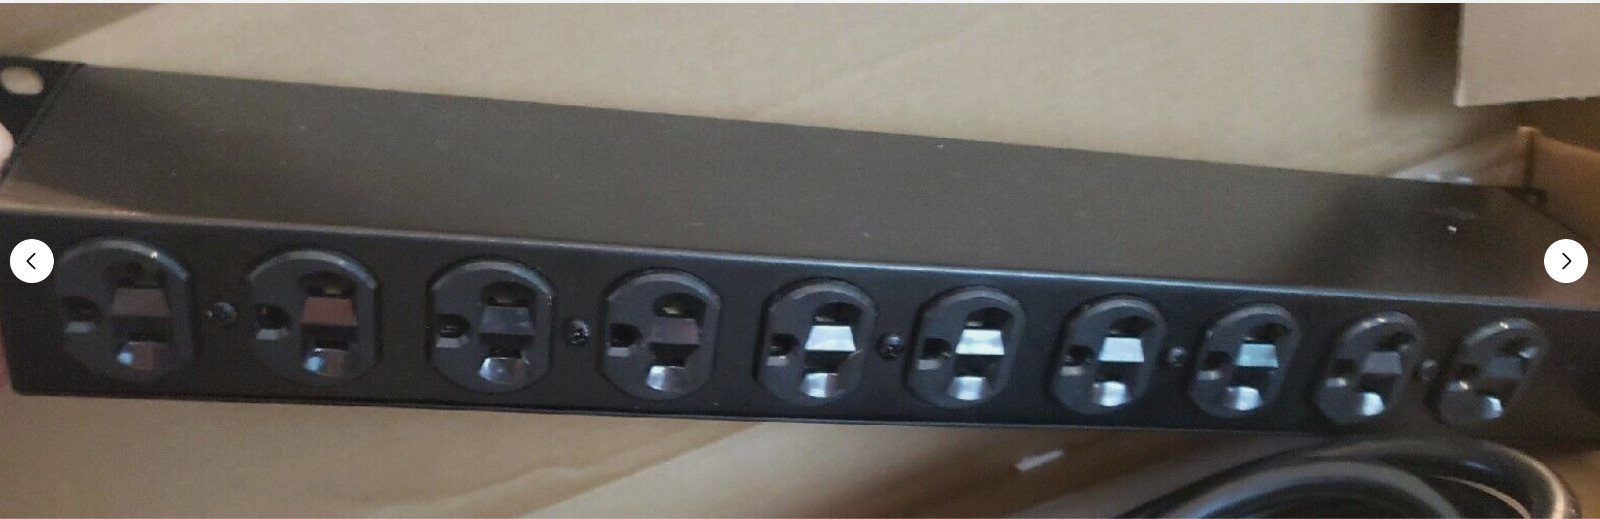 CYBERPOWER CPS-1220RMS Surge Protector 120V/20A 12 Outlets ***BRAND NEW in BOX**